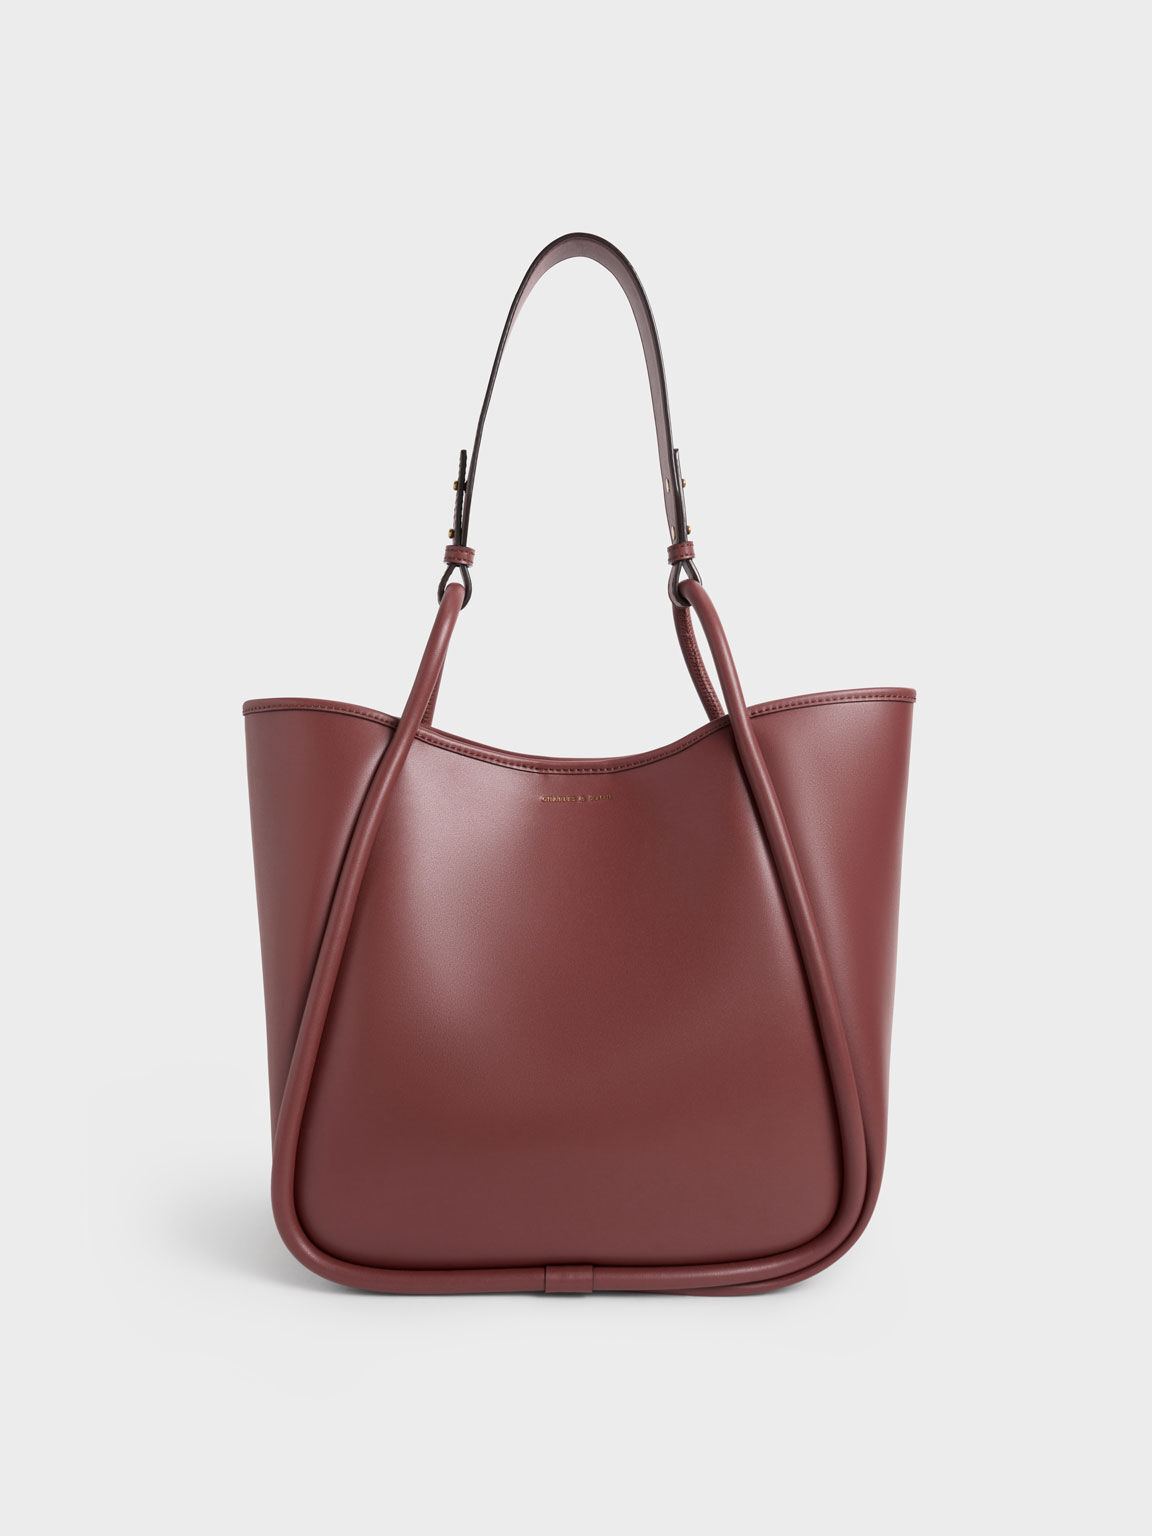 Women's New Arrival Bags | Latest Styles - CHARLES & KEITH US